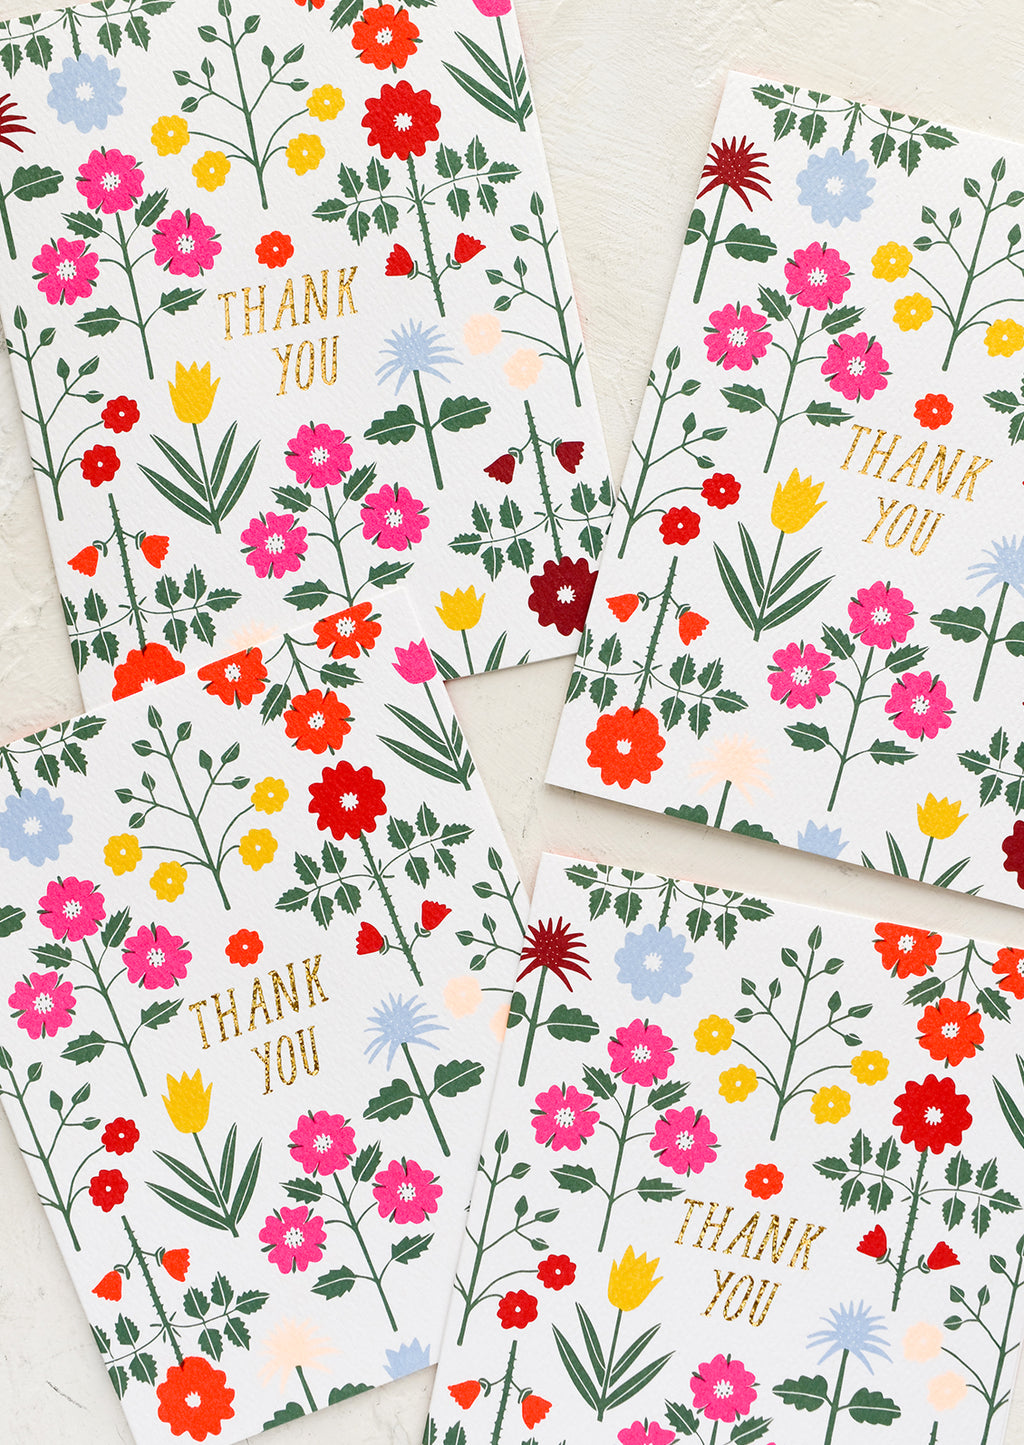 Boxed Set of 8: A set of thank you cards with vibrant floral pattern and gold "Thank You" text at center.